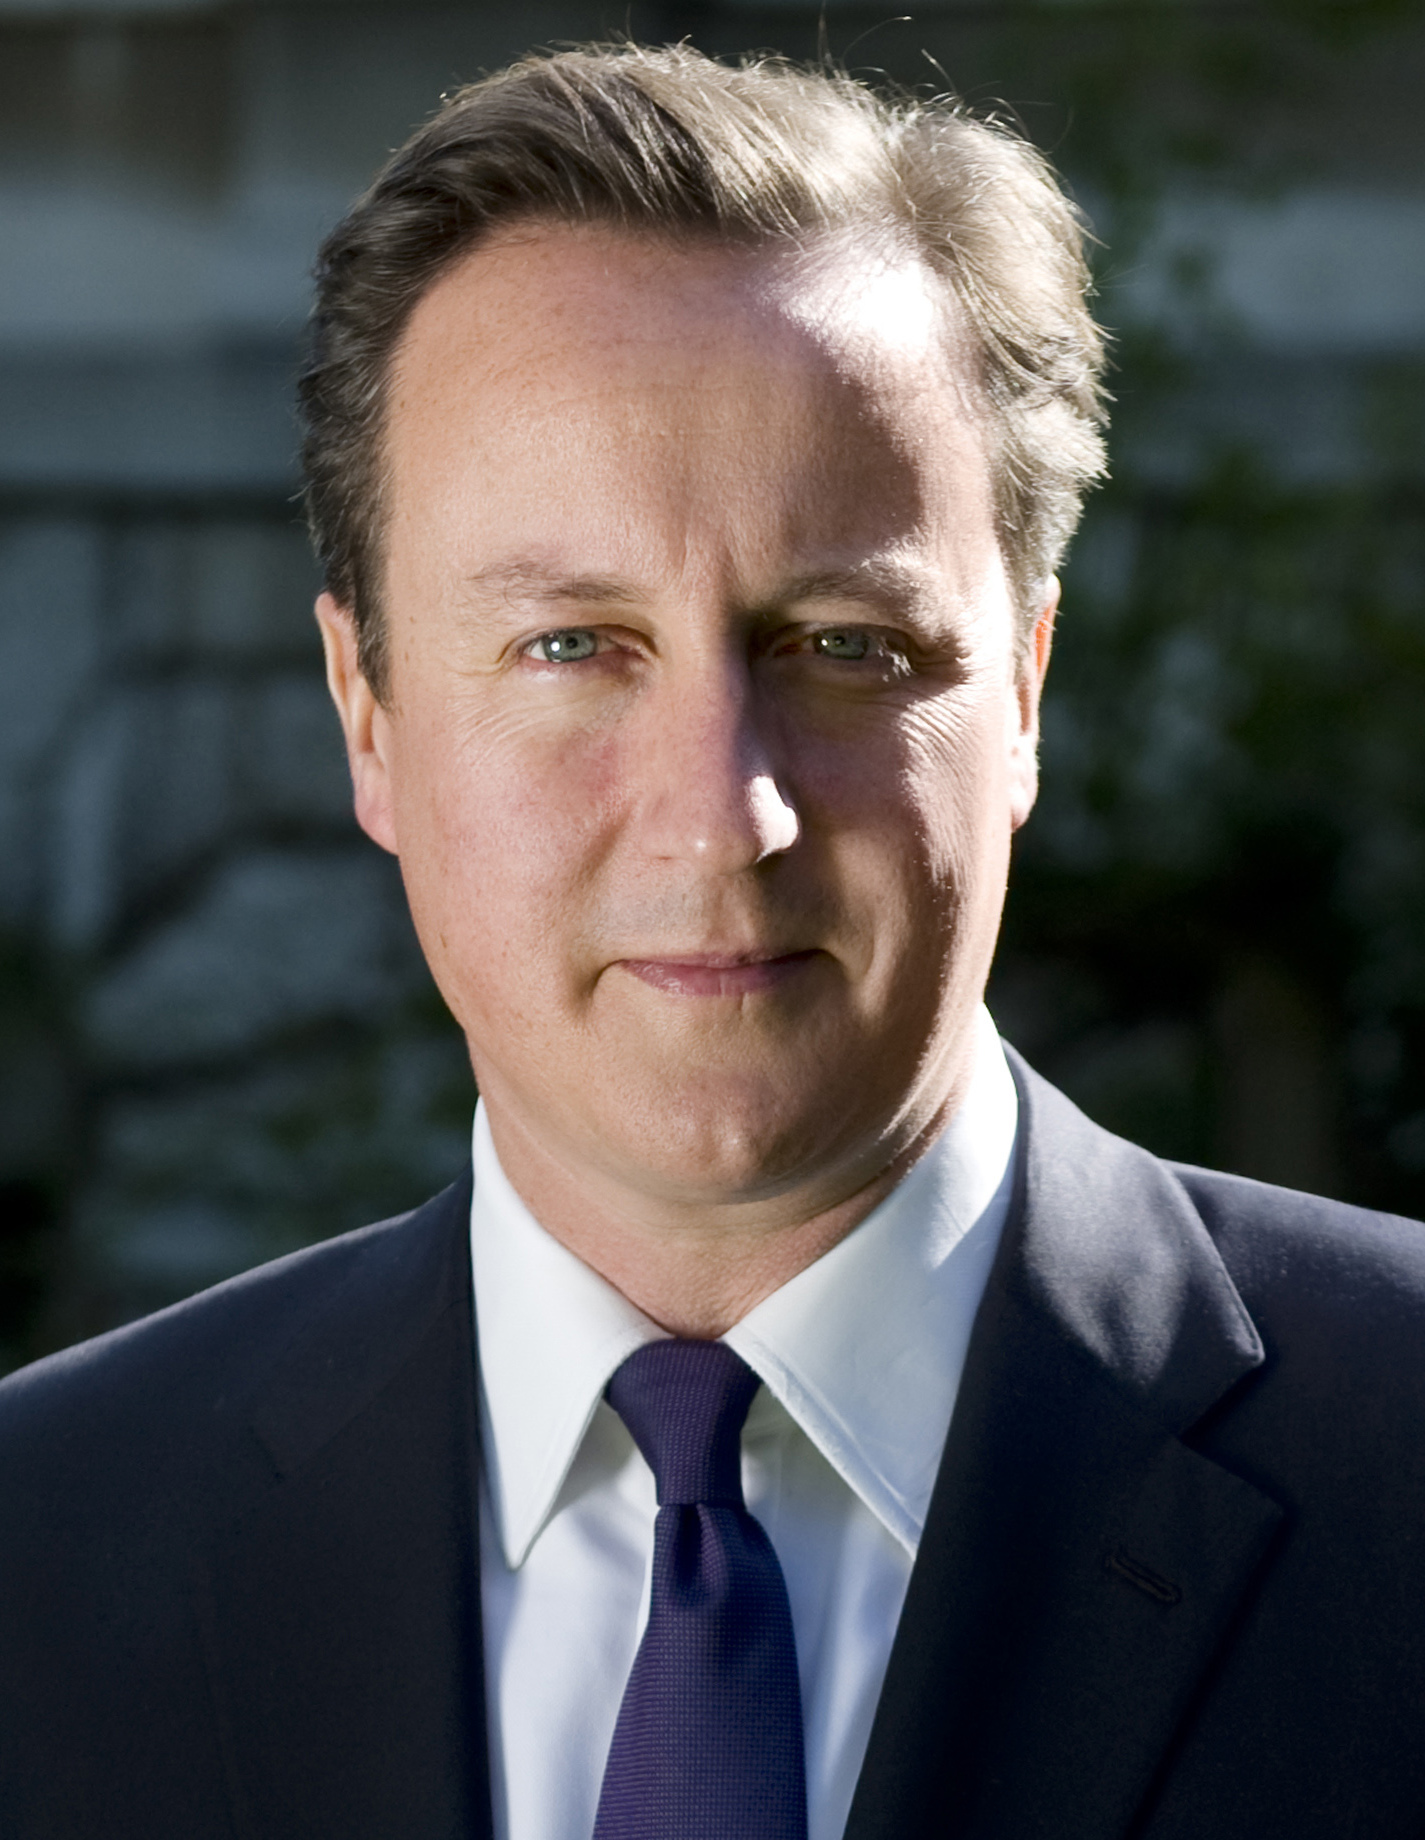 The 55-year old son of father Ian Donald Cameron and mother Mary Fleur David Cameron in 2022 photo. David Cameron earned a  million dollar salary - leaving the net worth at 50 million in 2022